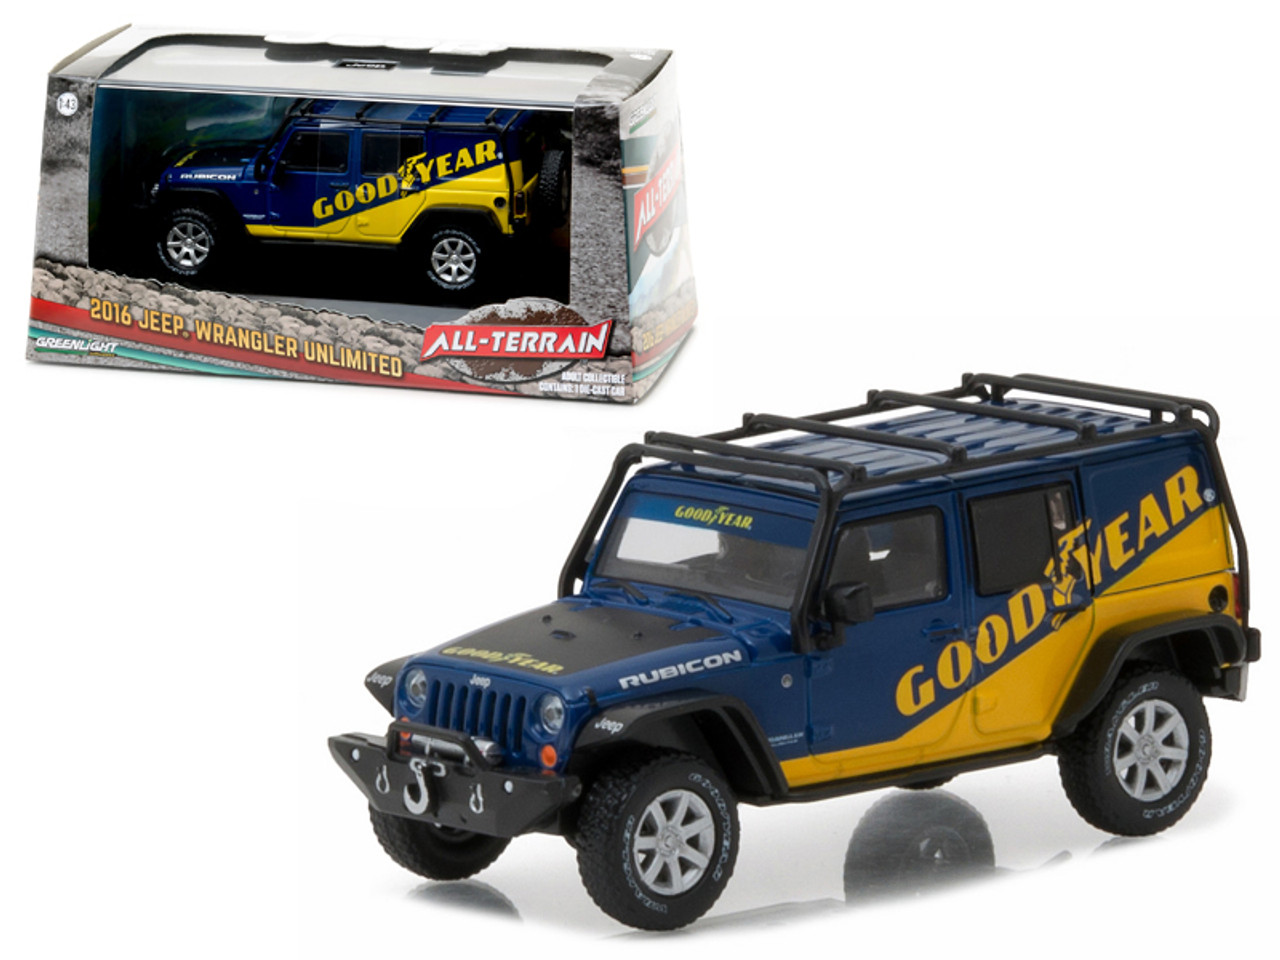 2016 Jeep Wrangler Unlimited Good Year with Roof Rack, Fender Flares, and Winch With Display Showcase 1/43 Diecast Model Car by Greenlight